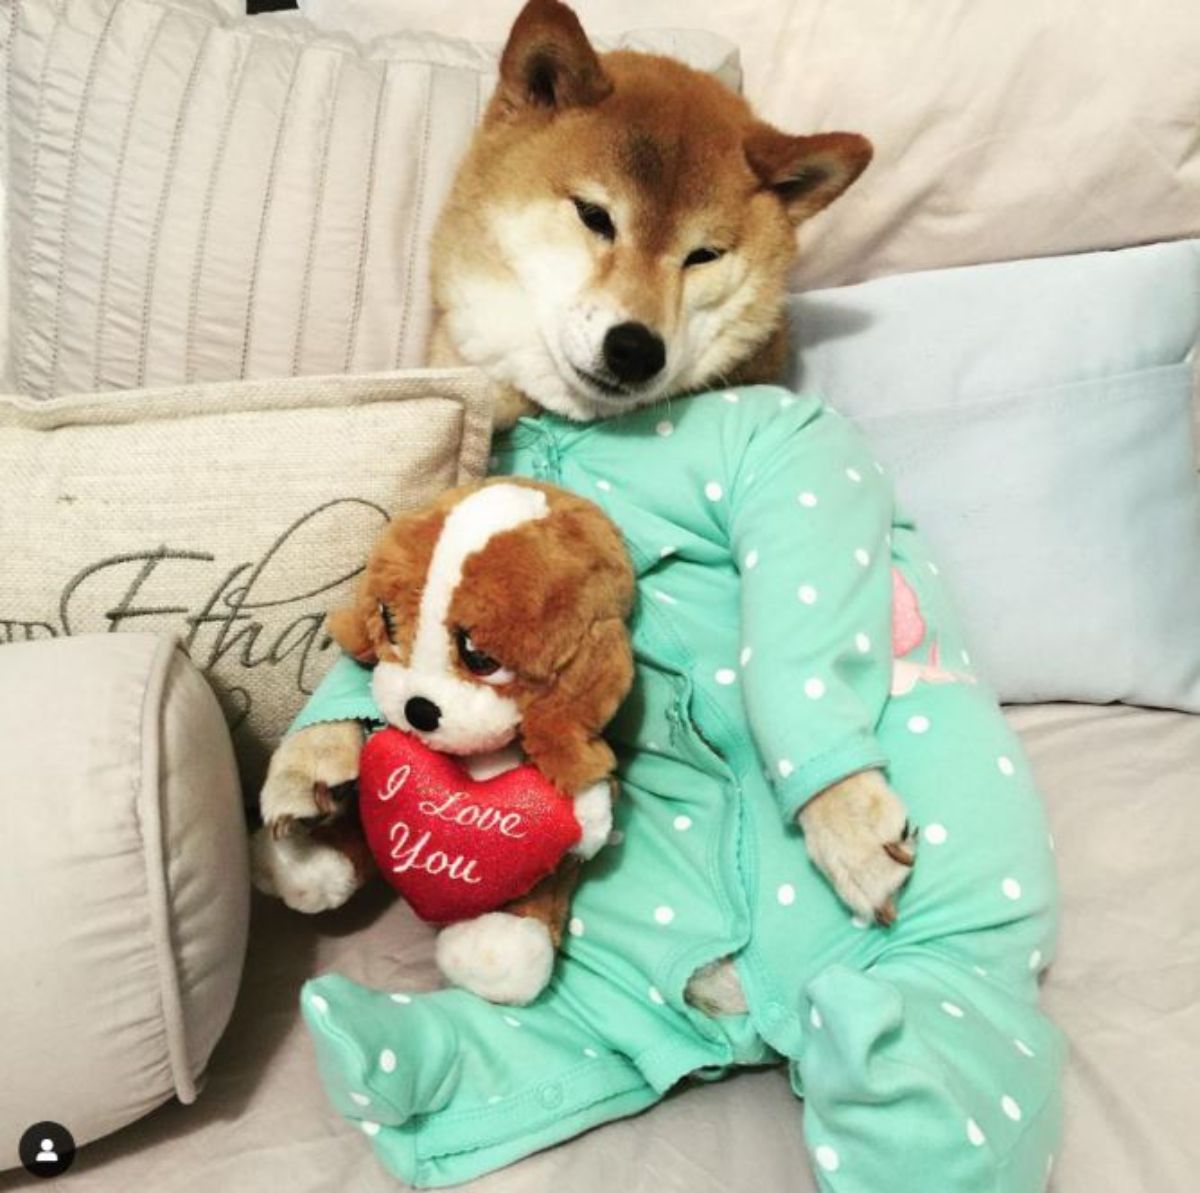 brown and white shiba inu wearing a green and white polka dotted onesie and holding a brown and white teddy bear